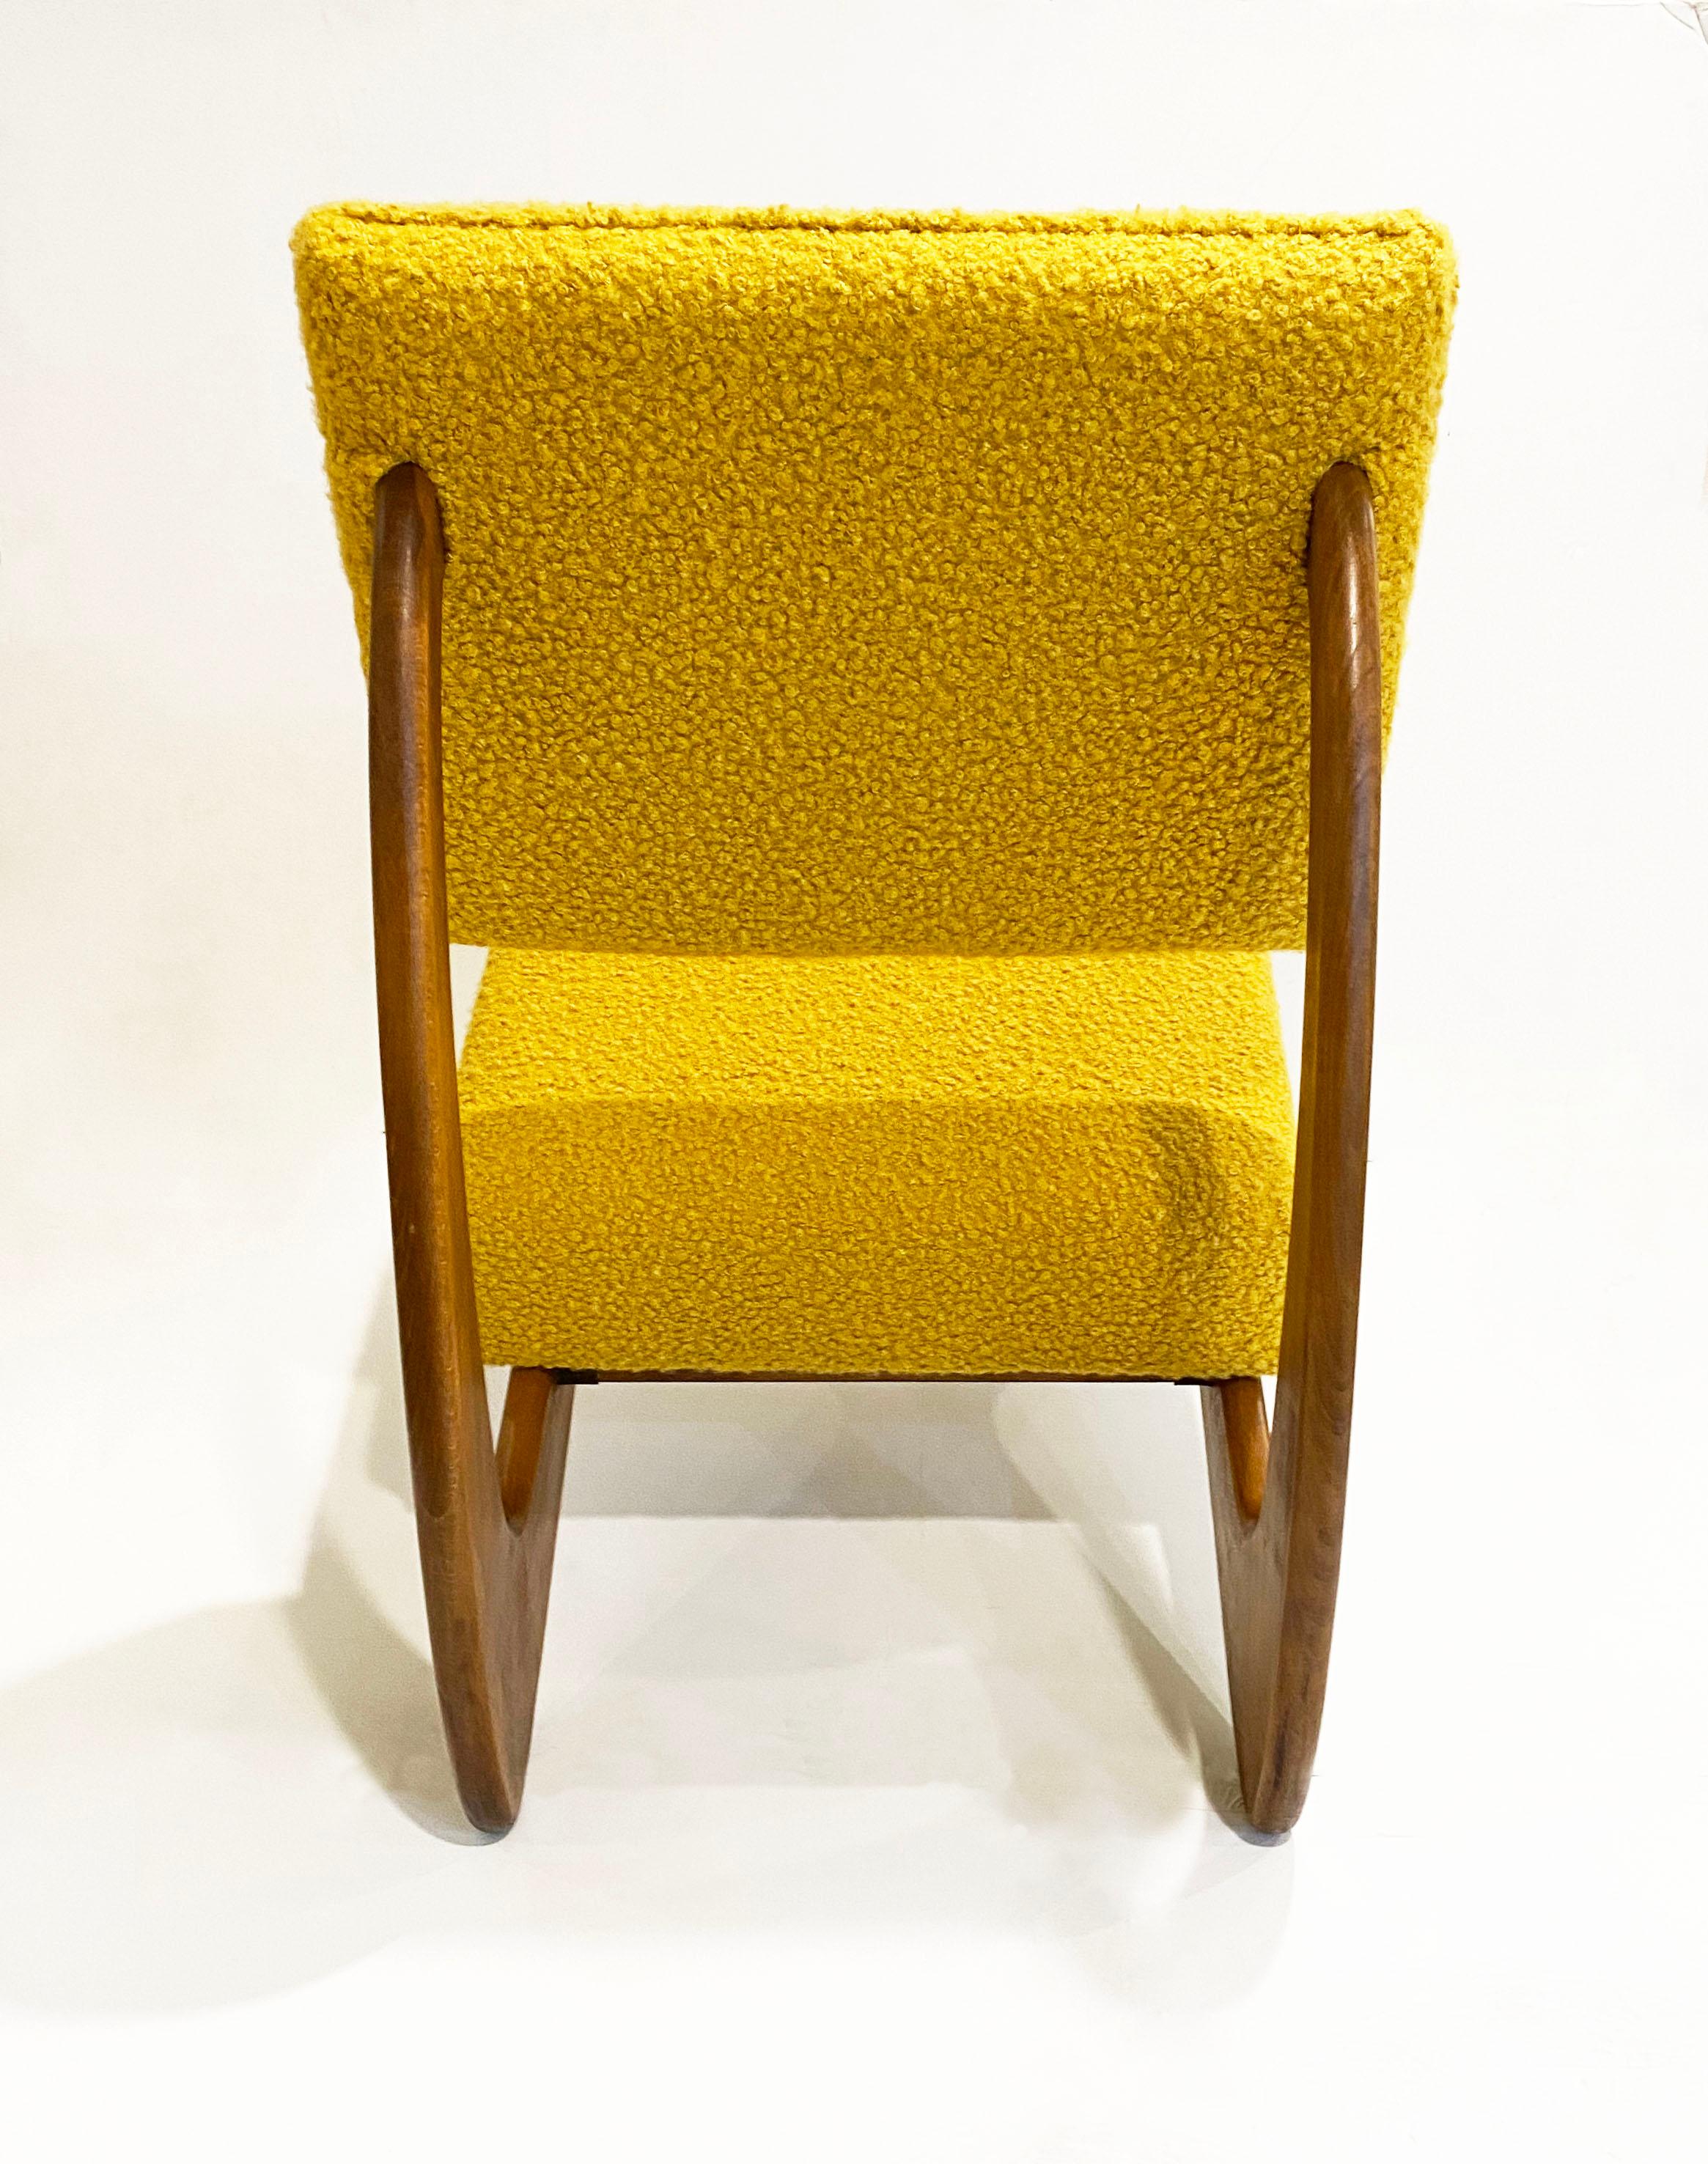 Hand-Crafted Bespoke Italian Pair of Boucle Mustard Yellow Aero Curved Beech Lounge Chairs For Sale